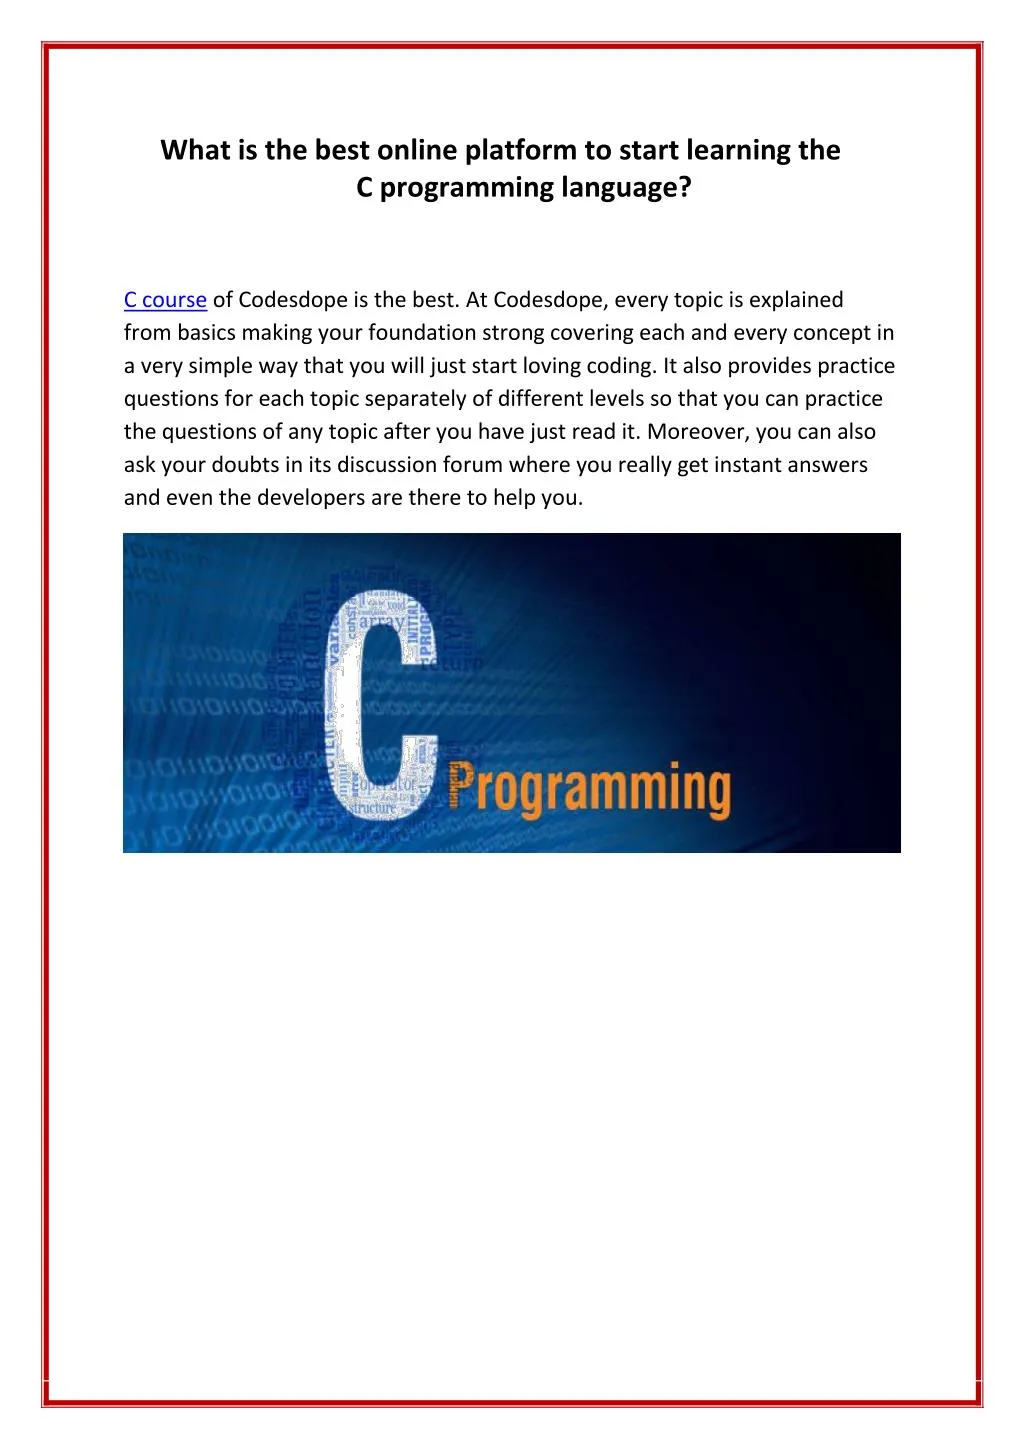 PPT - What is the best online platform to start learning the C programming  language PowerPoint Presentation - ID:7492662